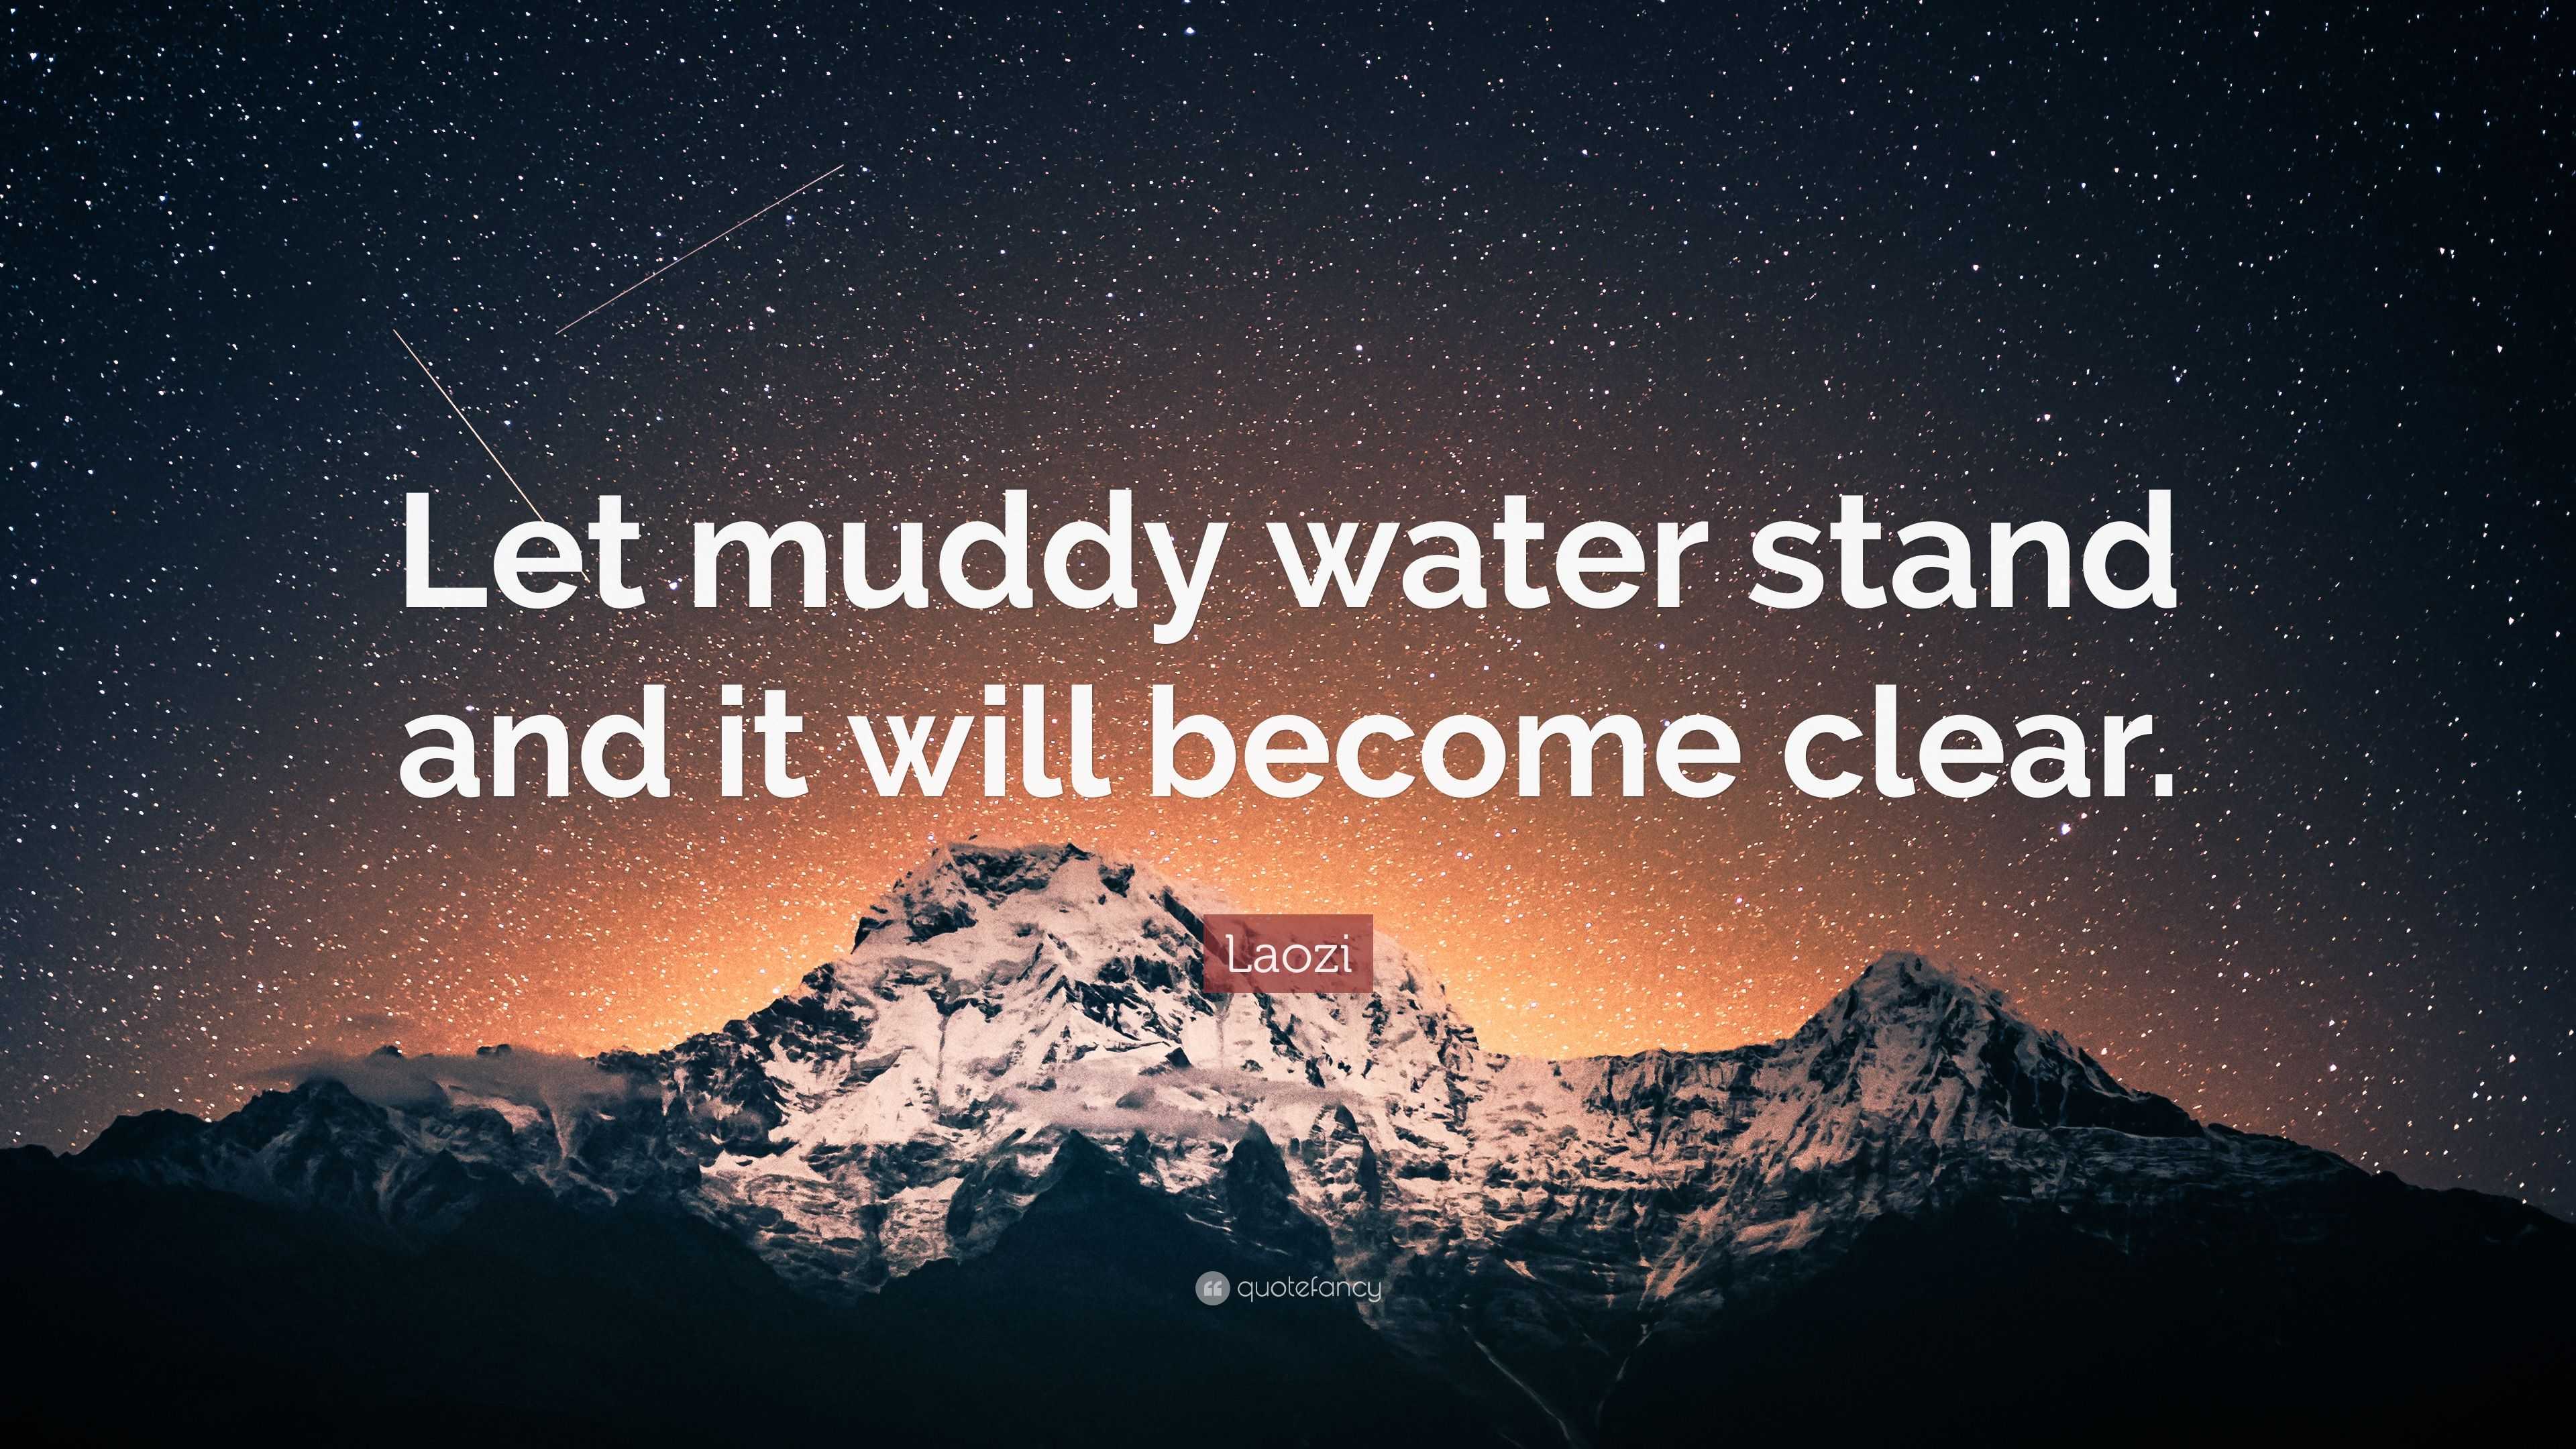 Laozi Quote: “Let muddy water stand and it will become clear.”